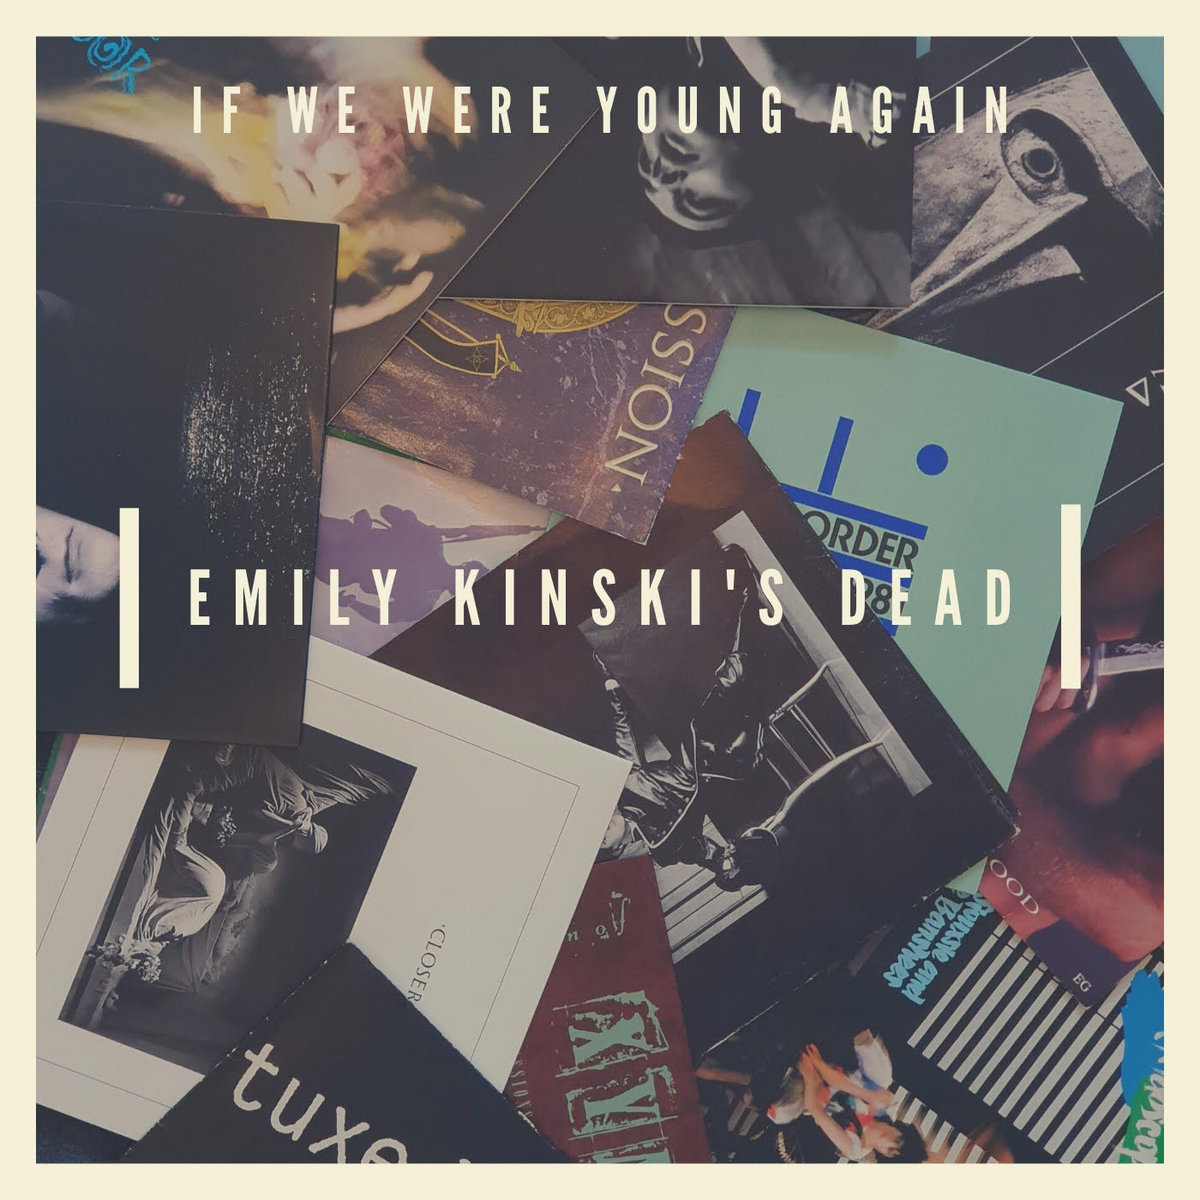 Electro News @ – Emily Kinski’s Dead – If We Were Young Again EP